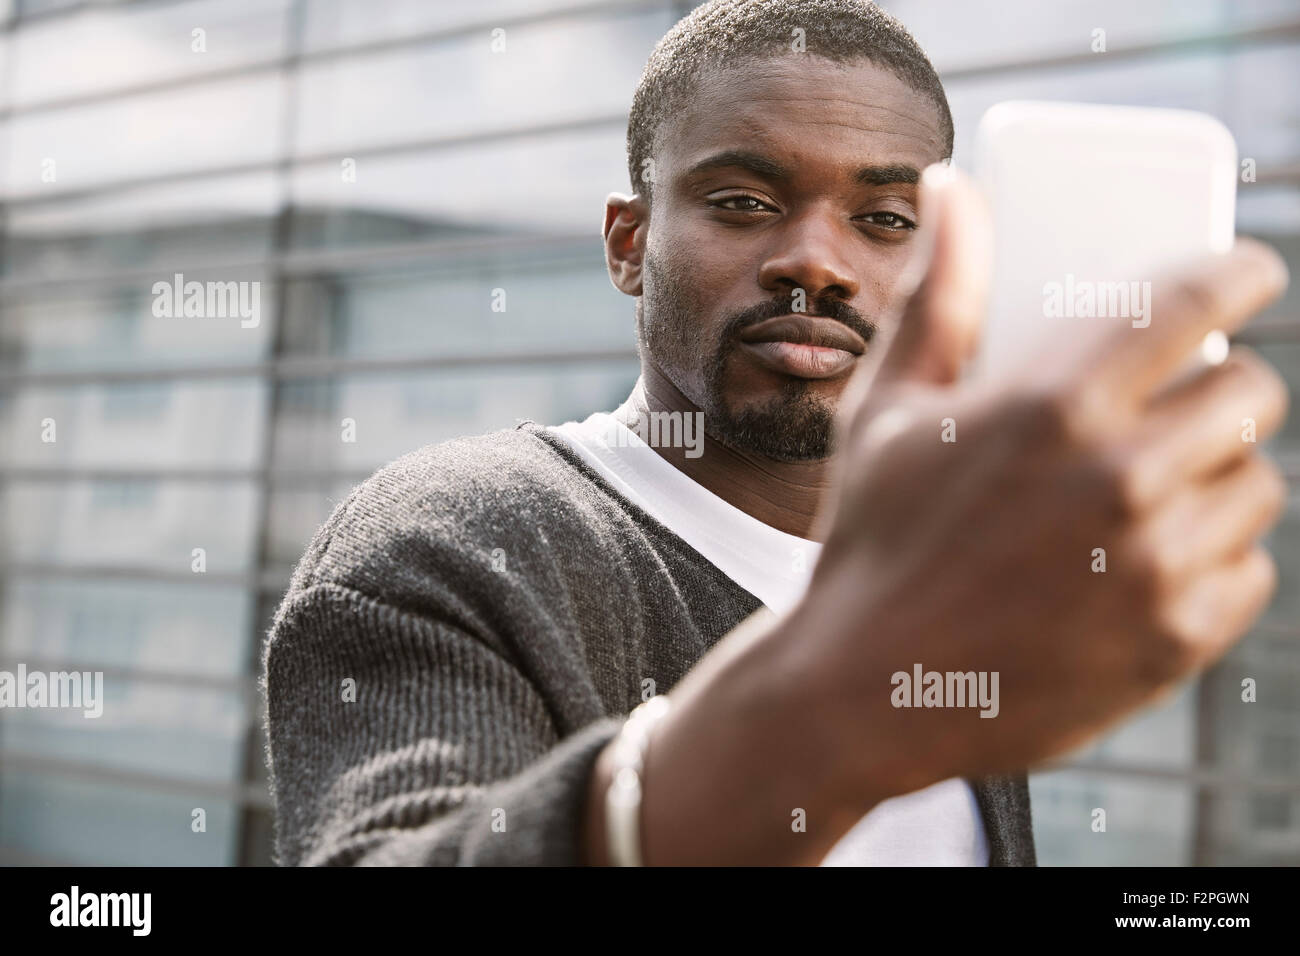 Young man taking a selfie outdoors Stock Photo